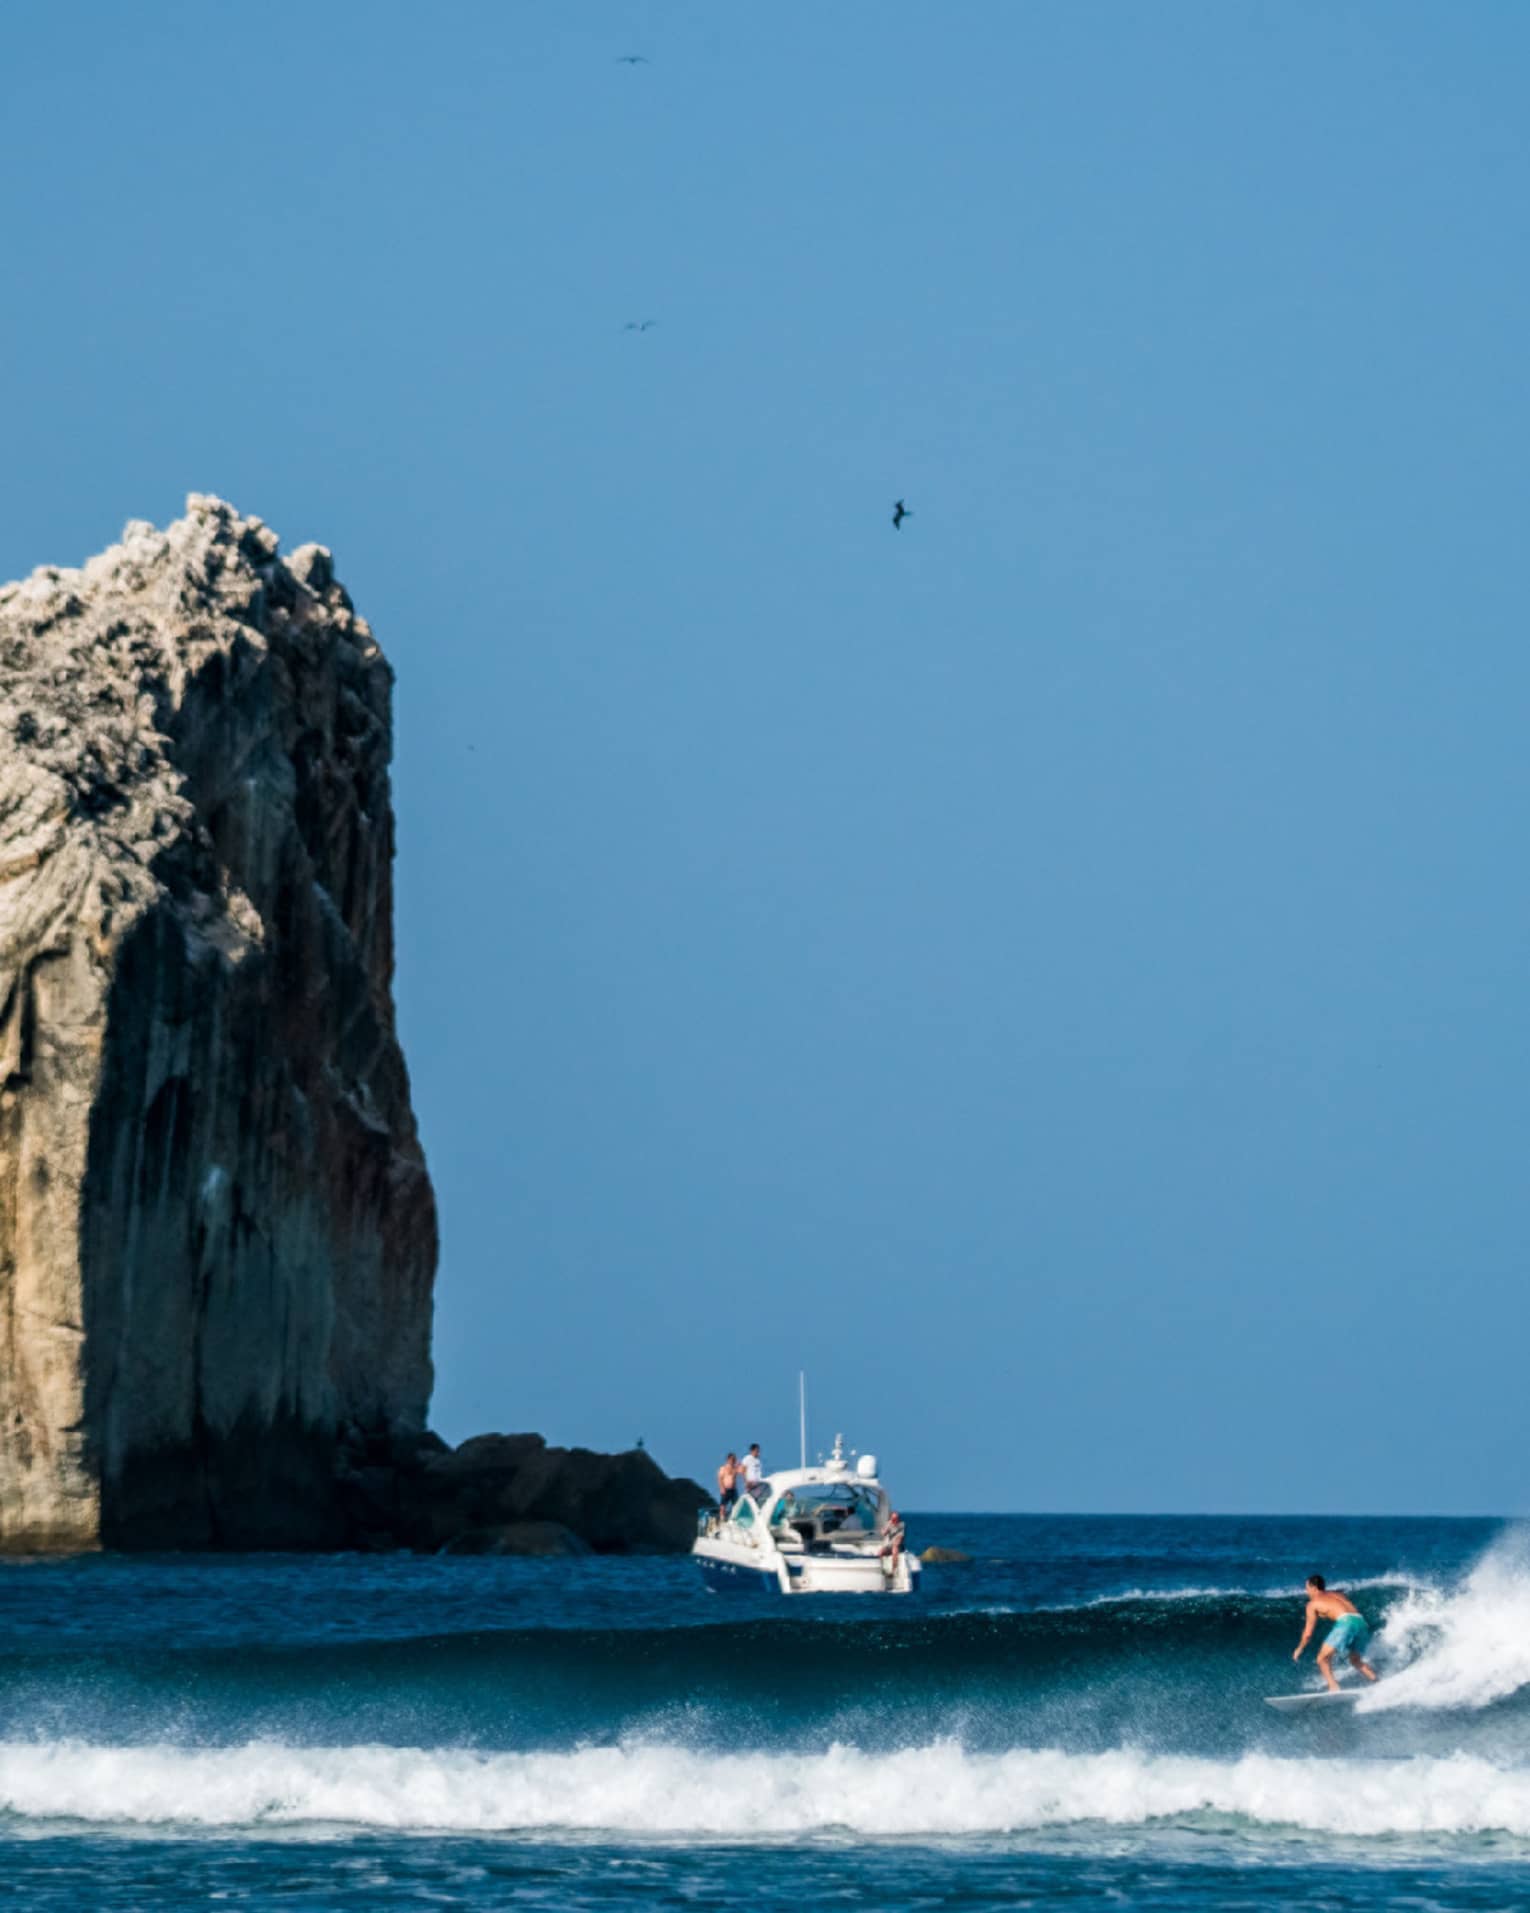 A surfer rides a wave in the foreground, with a boat nearby and a large rock formation towering above the water in the background